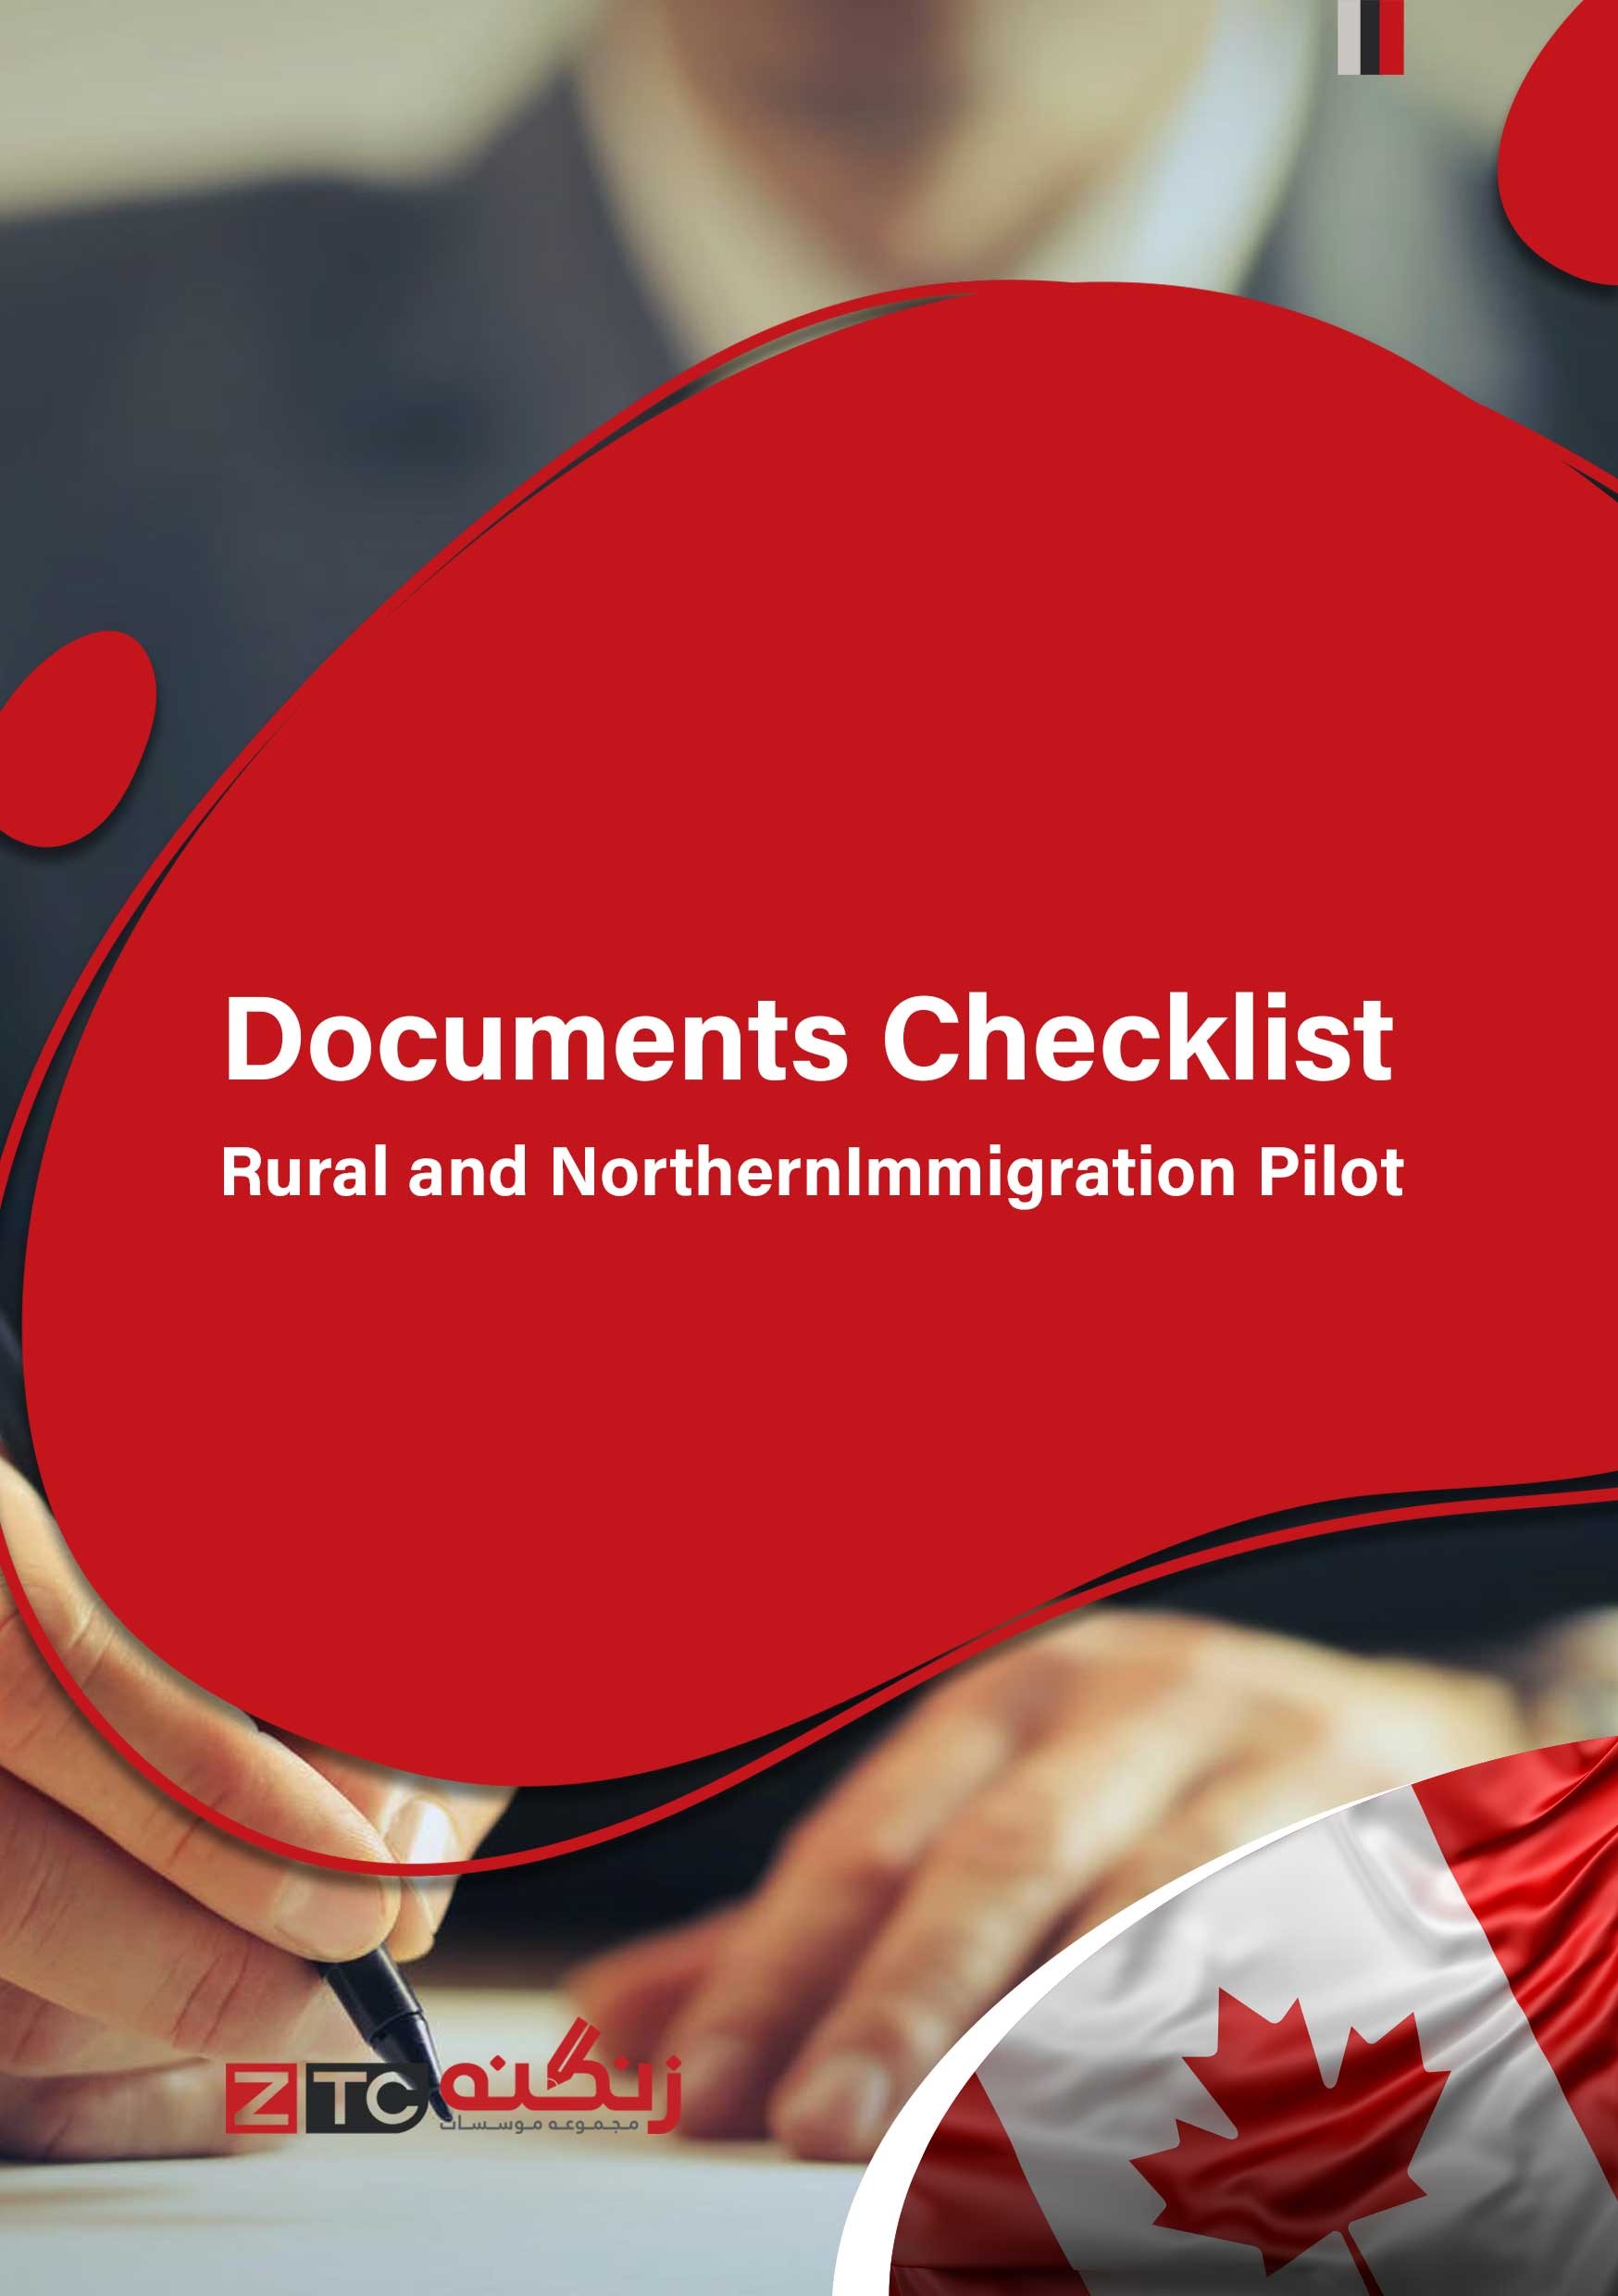 Documents Checklist - Rural and Northern Immigration Pilot